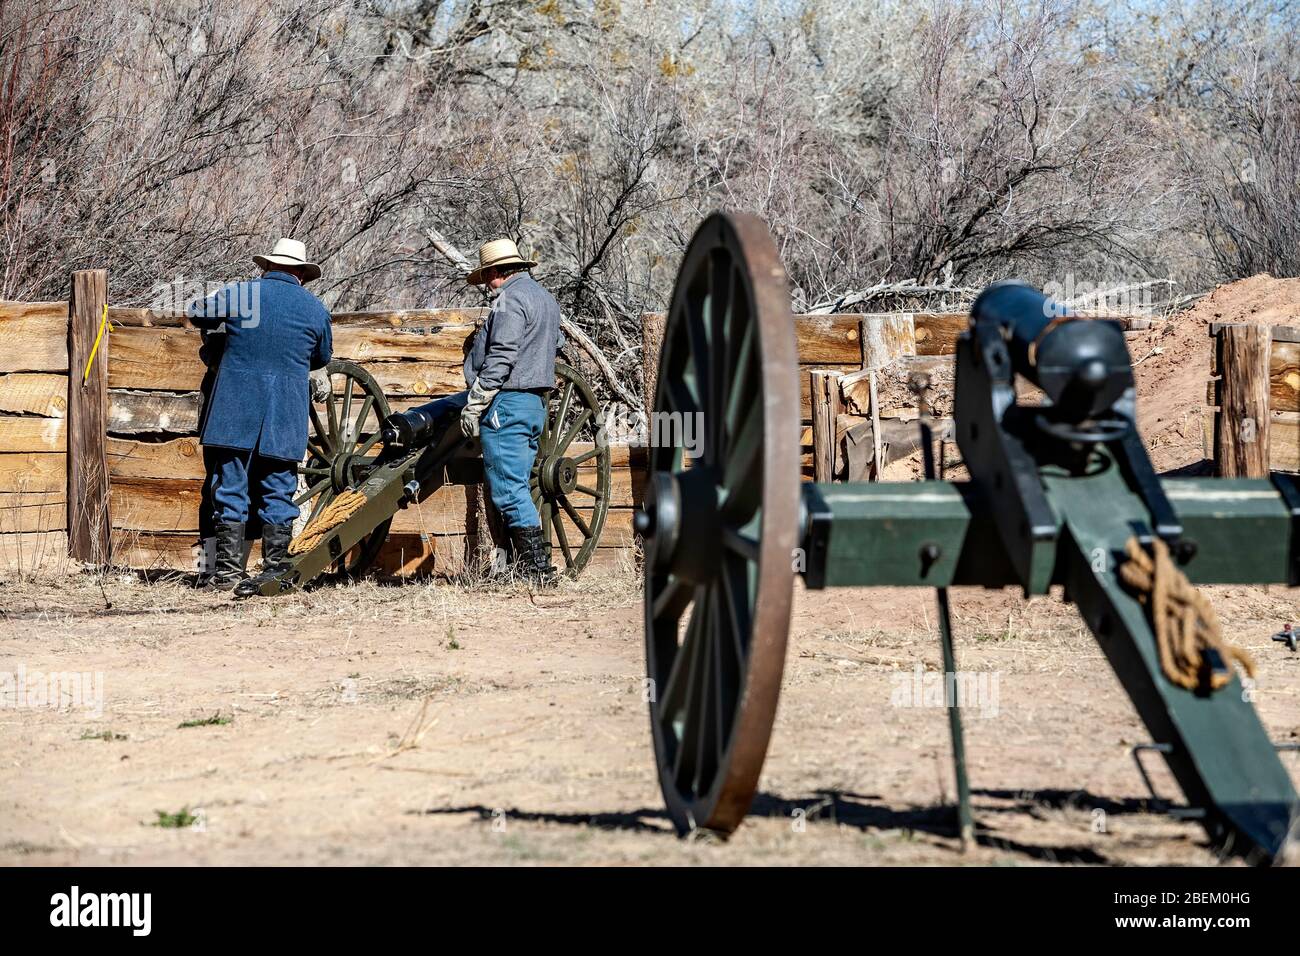 Confederate Army soldiers and cannon, Civil War reenactment, near Socorro, New Mexico USA Stock Photo